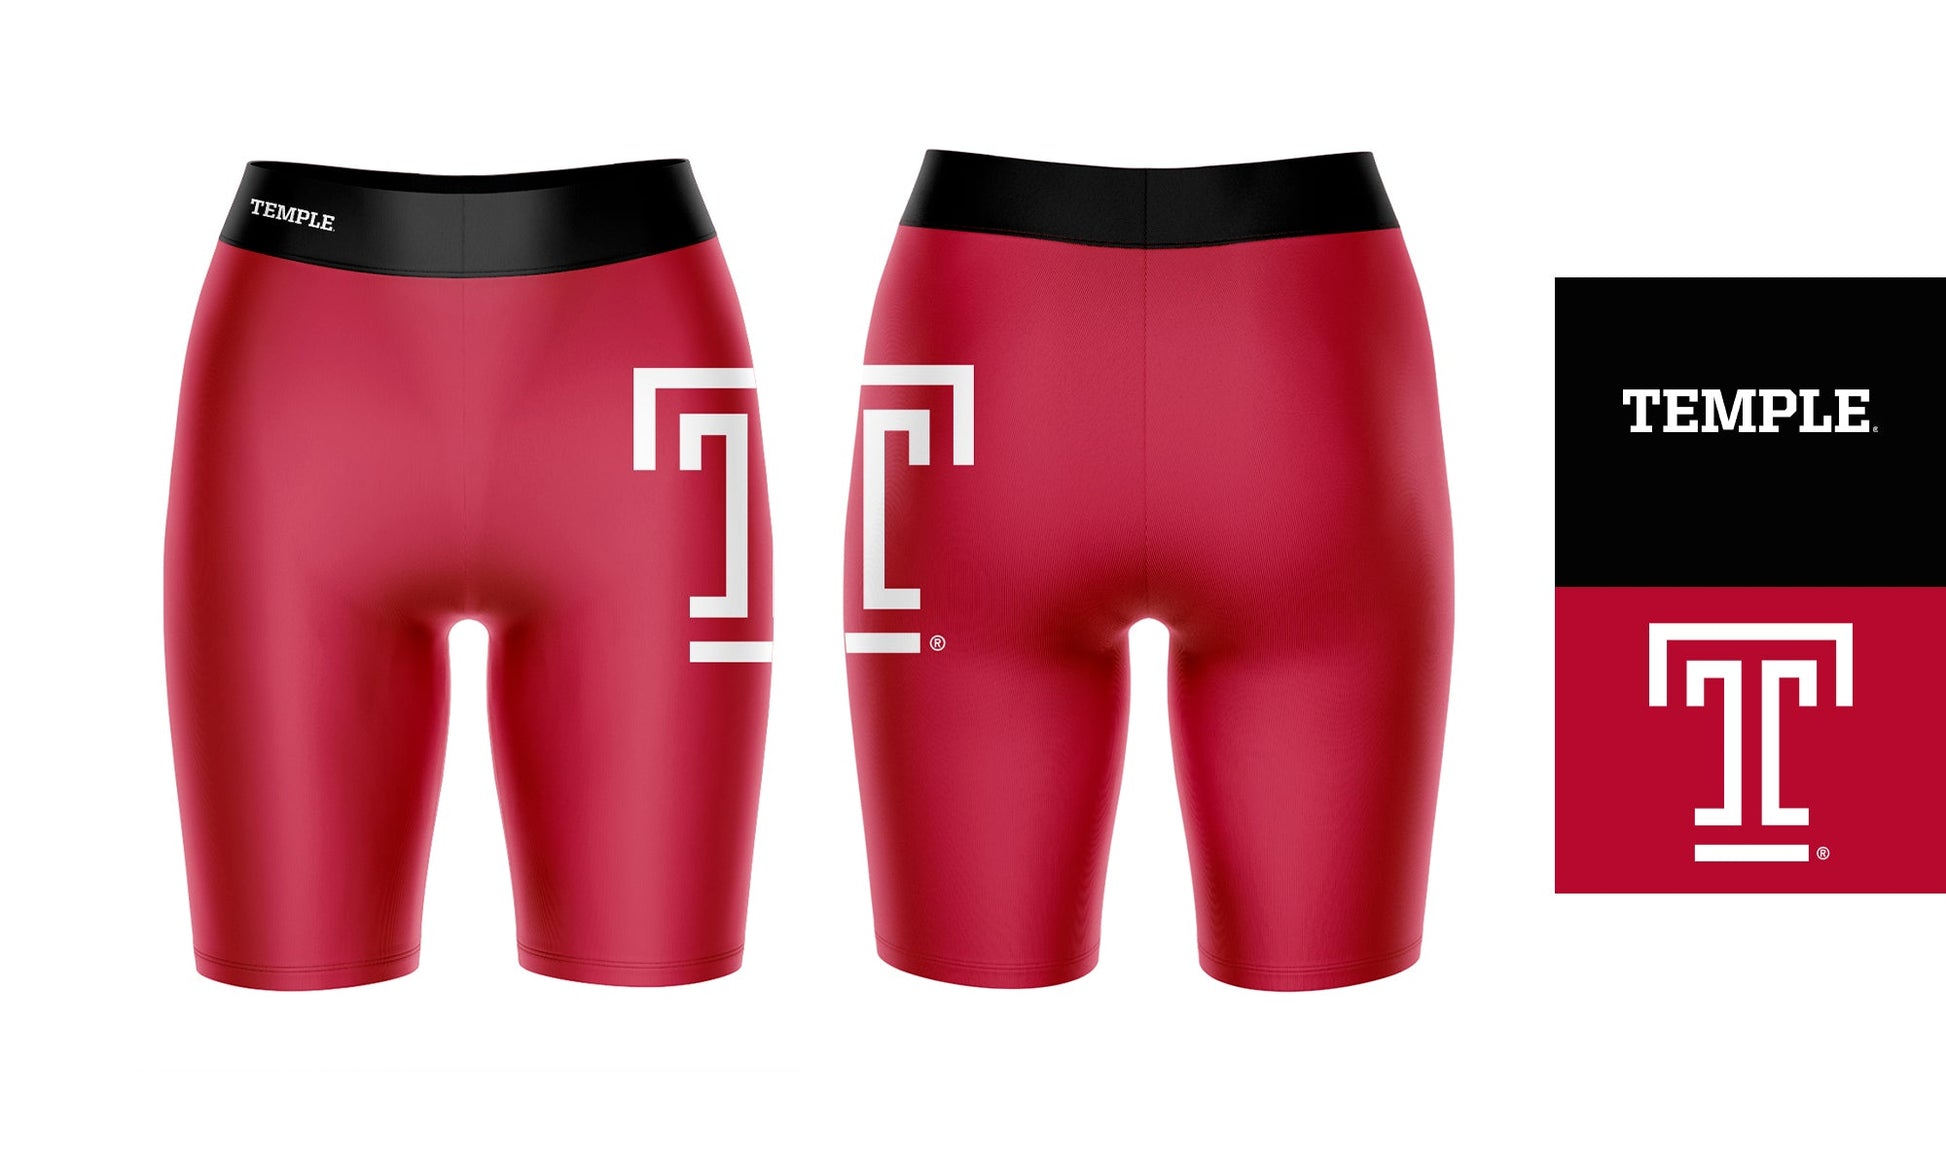 Temple Owls TU Vive La Fete Game Day Logo on Thigh and Waistband Red and Black Women Bike Short 9 Inseam